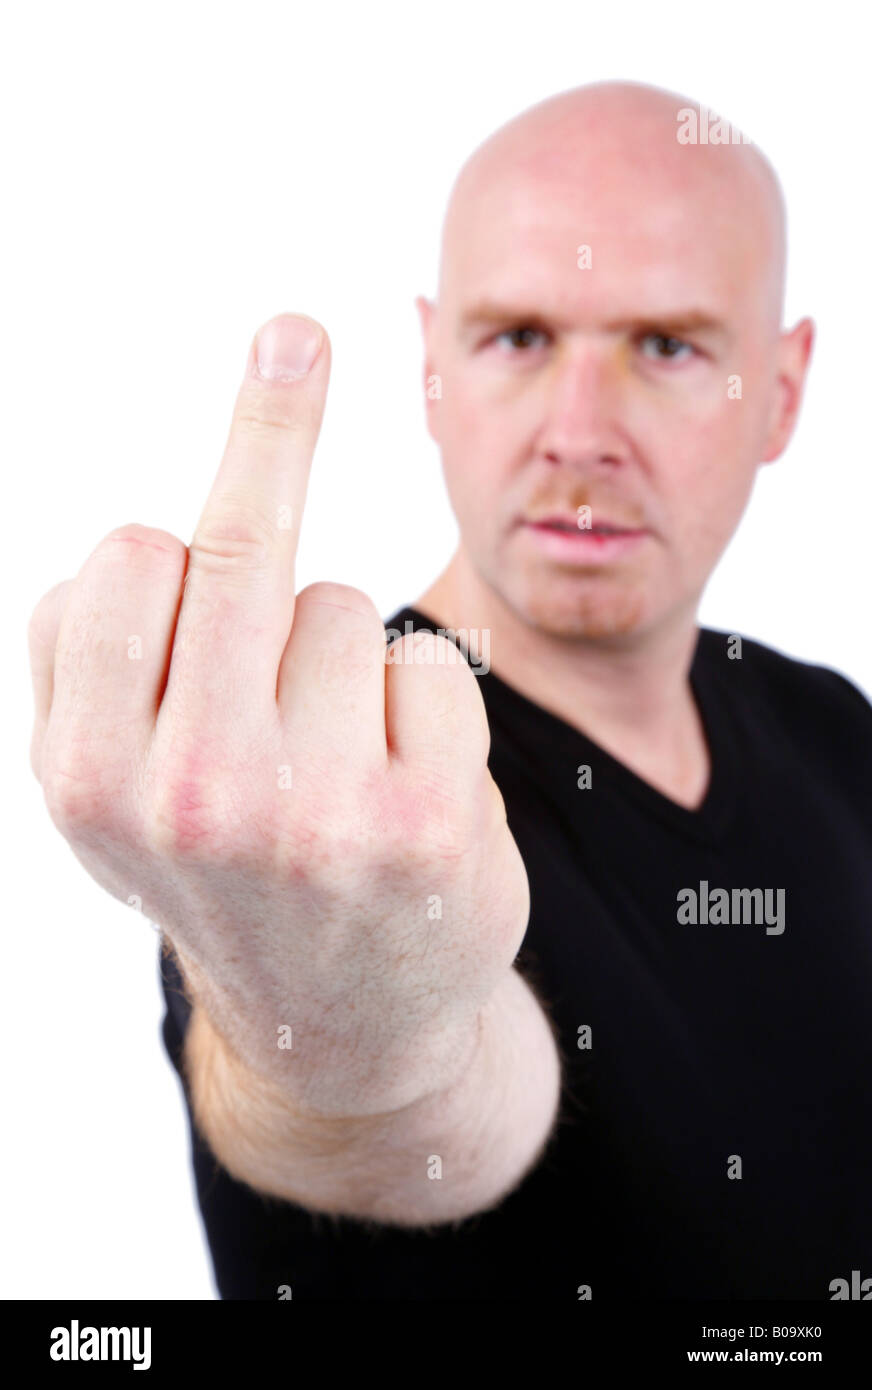 bald-headed-young-mean-man-showing-his-middle-finger-B09XK0.jpg